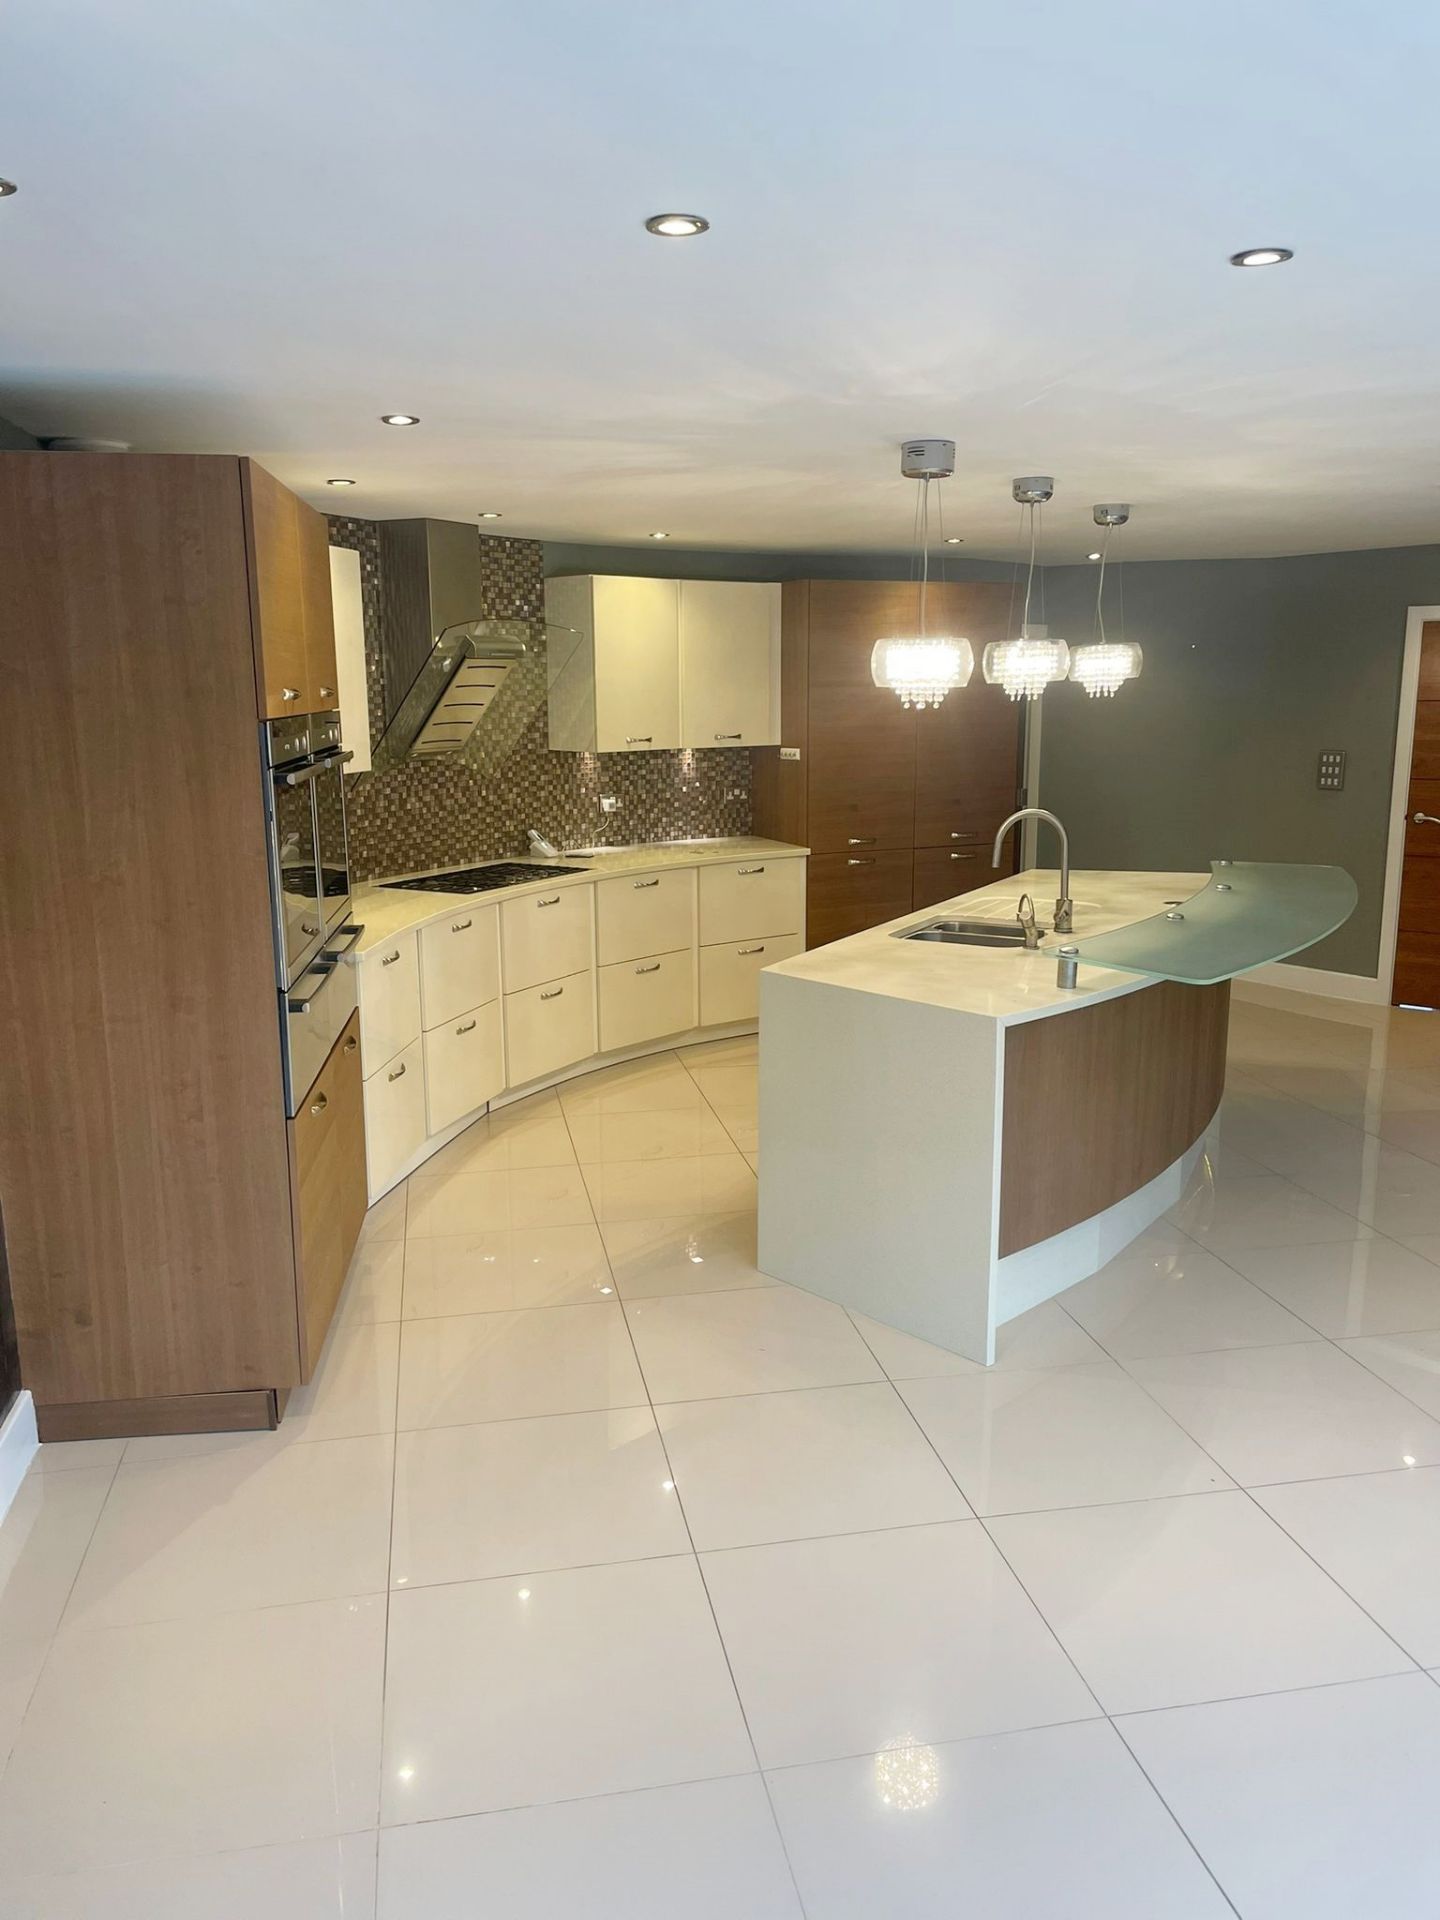 1 x Contemporary ALNO Fitted Kitchen With Branded  Appliances Created By Award Winning Kitchen - Image 42 of 89